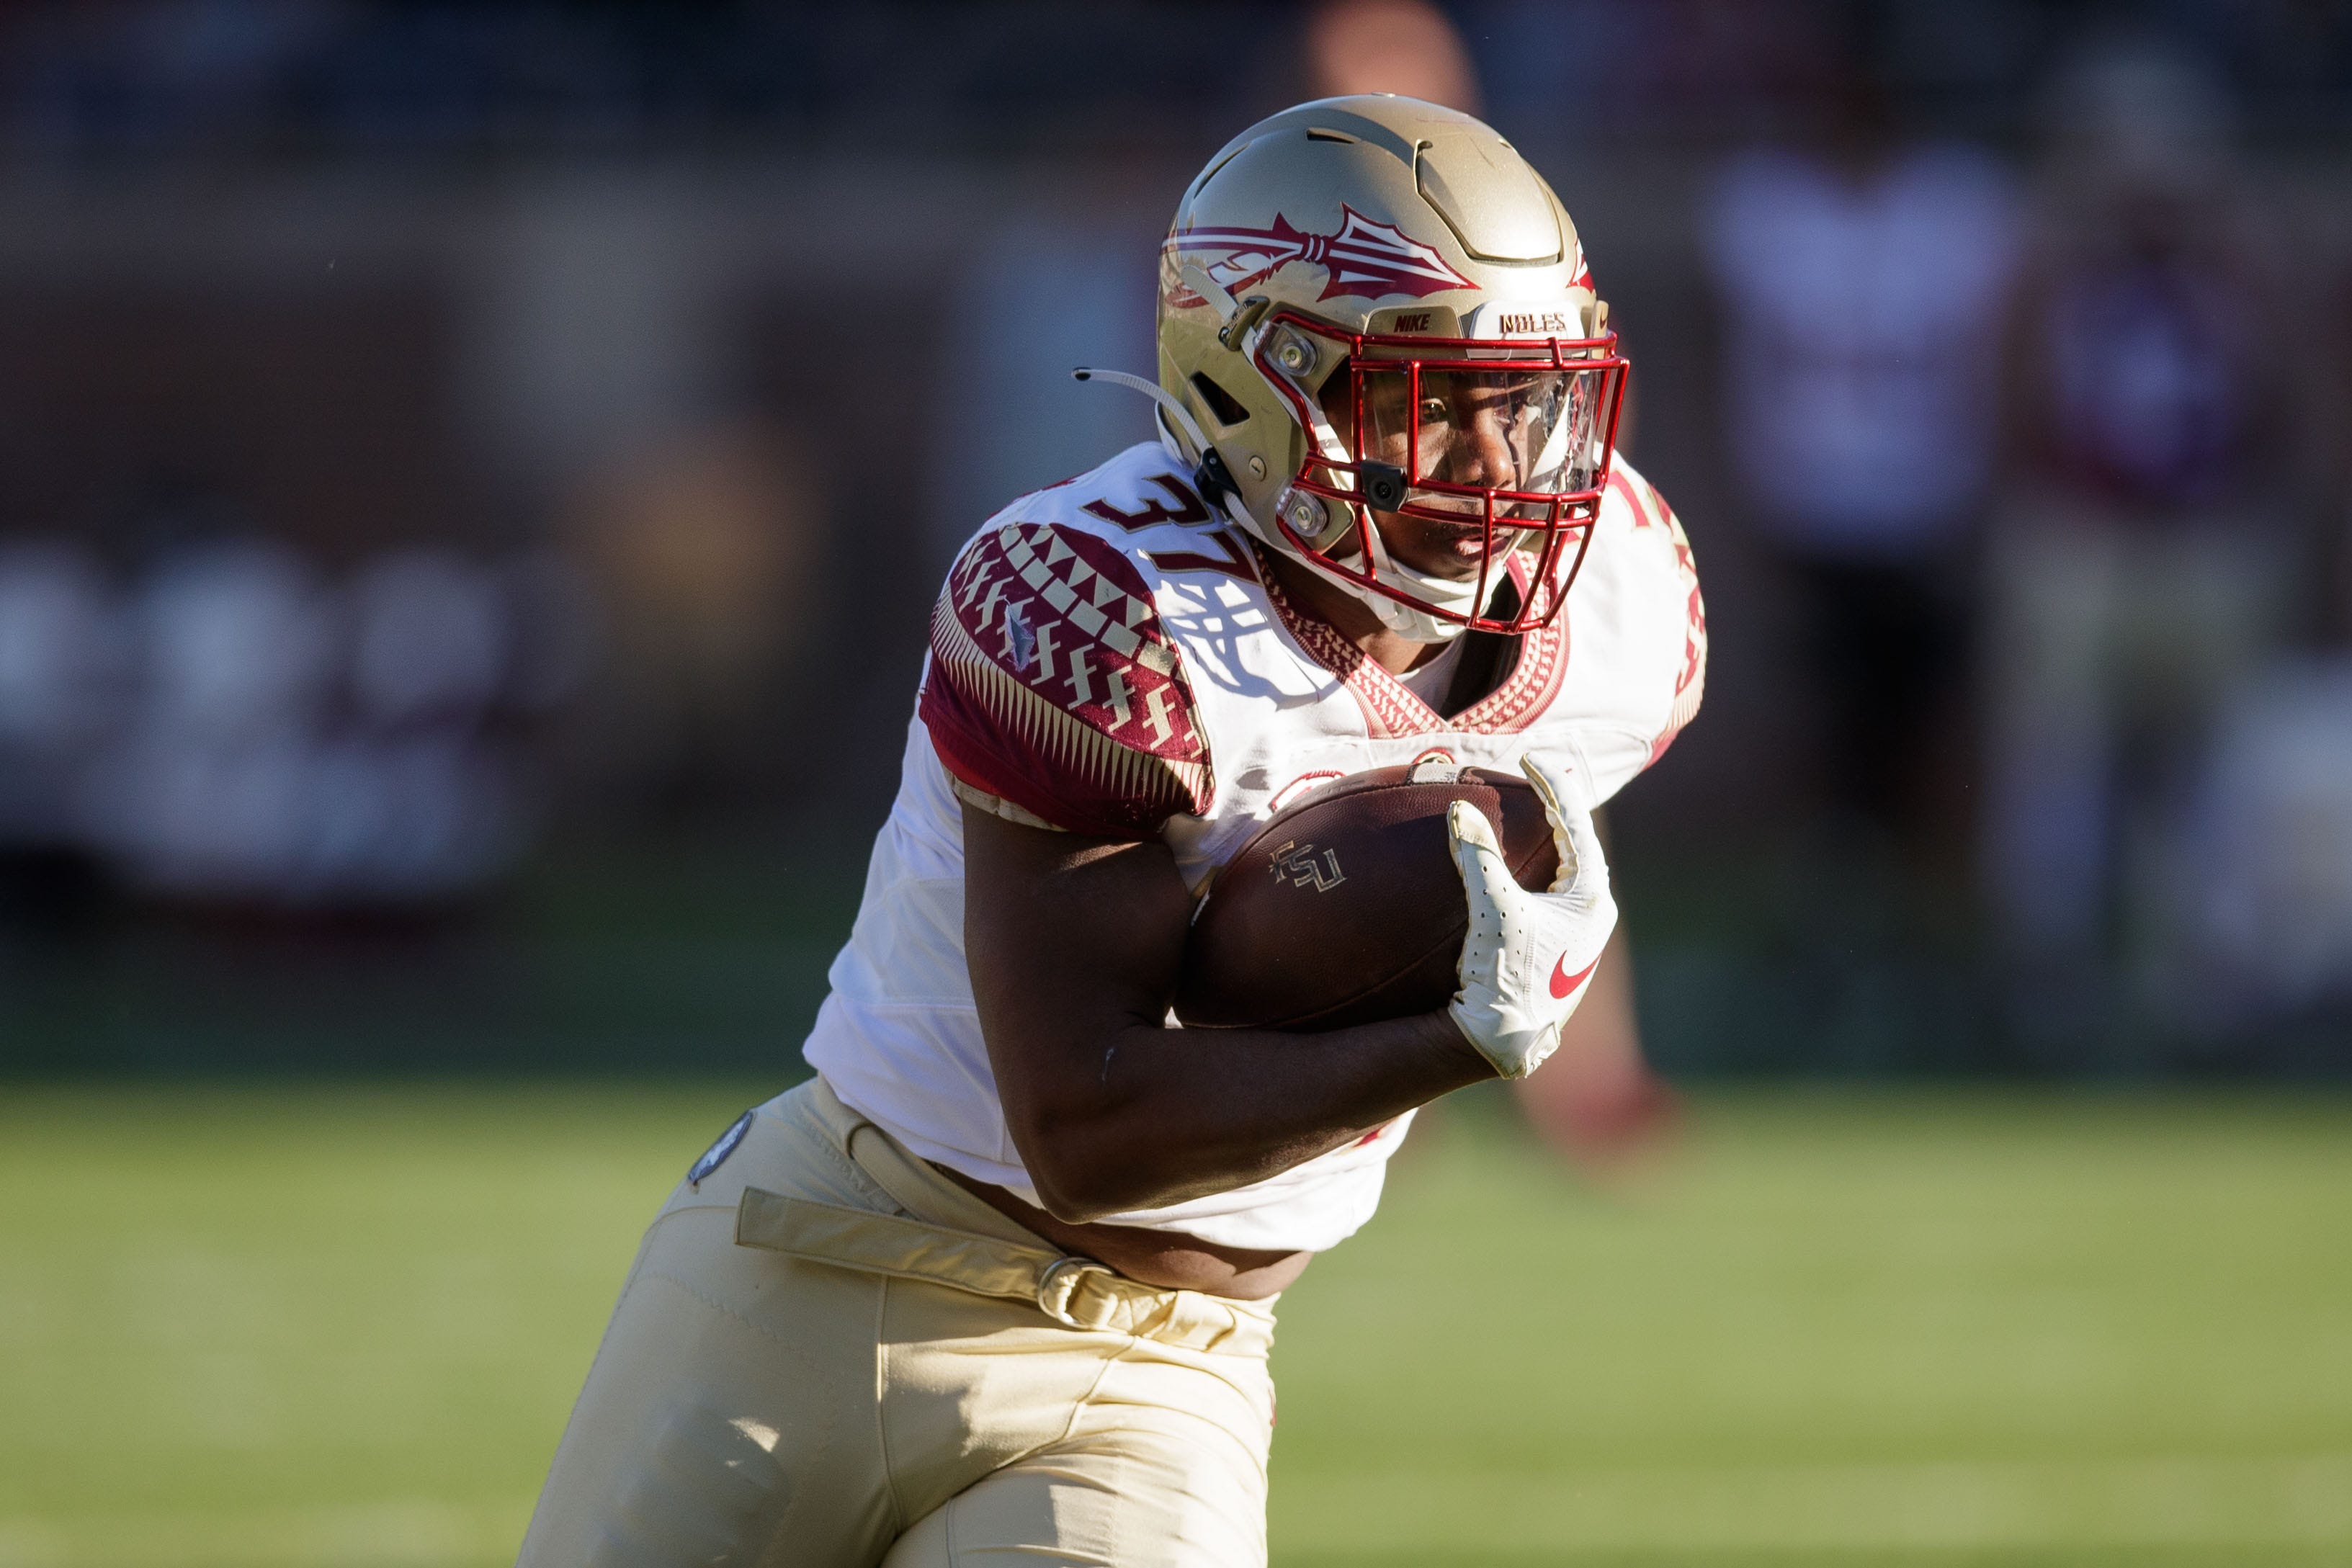 Former Florida State running back lands in PAC-12